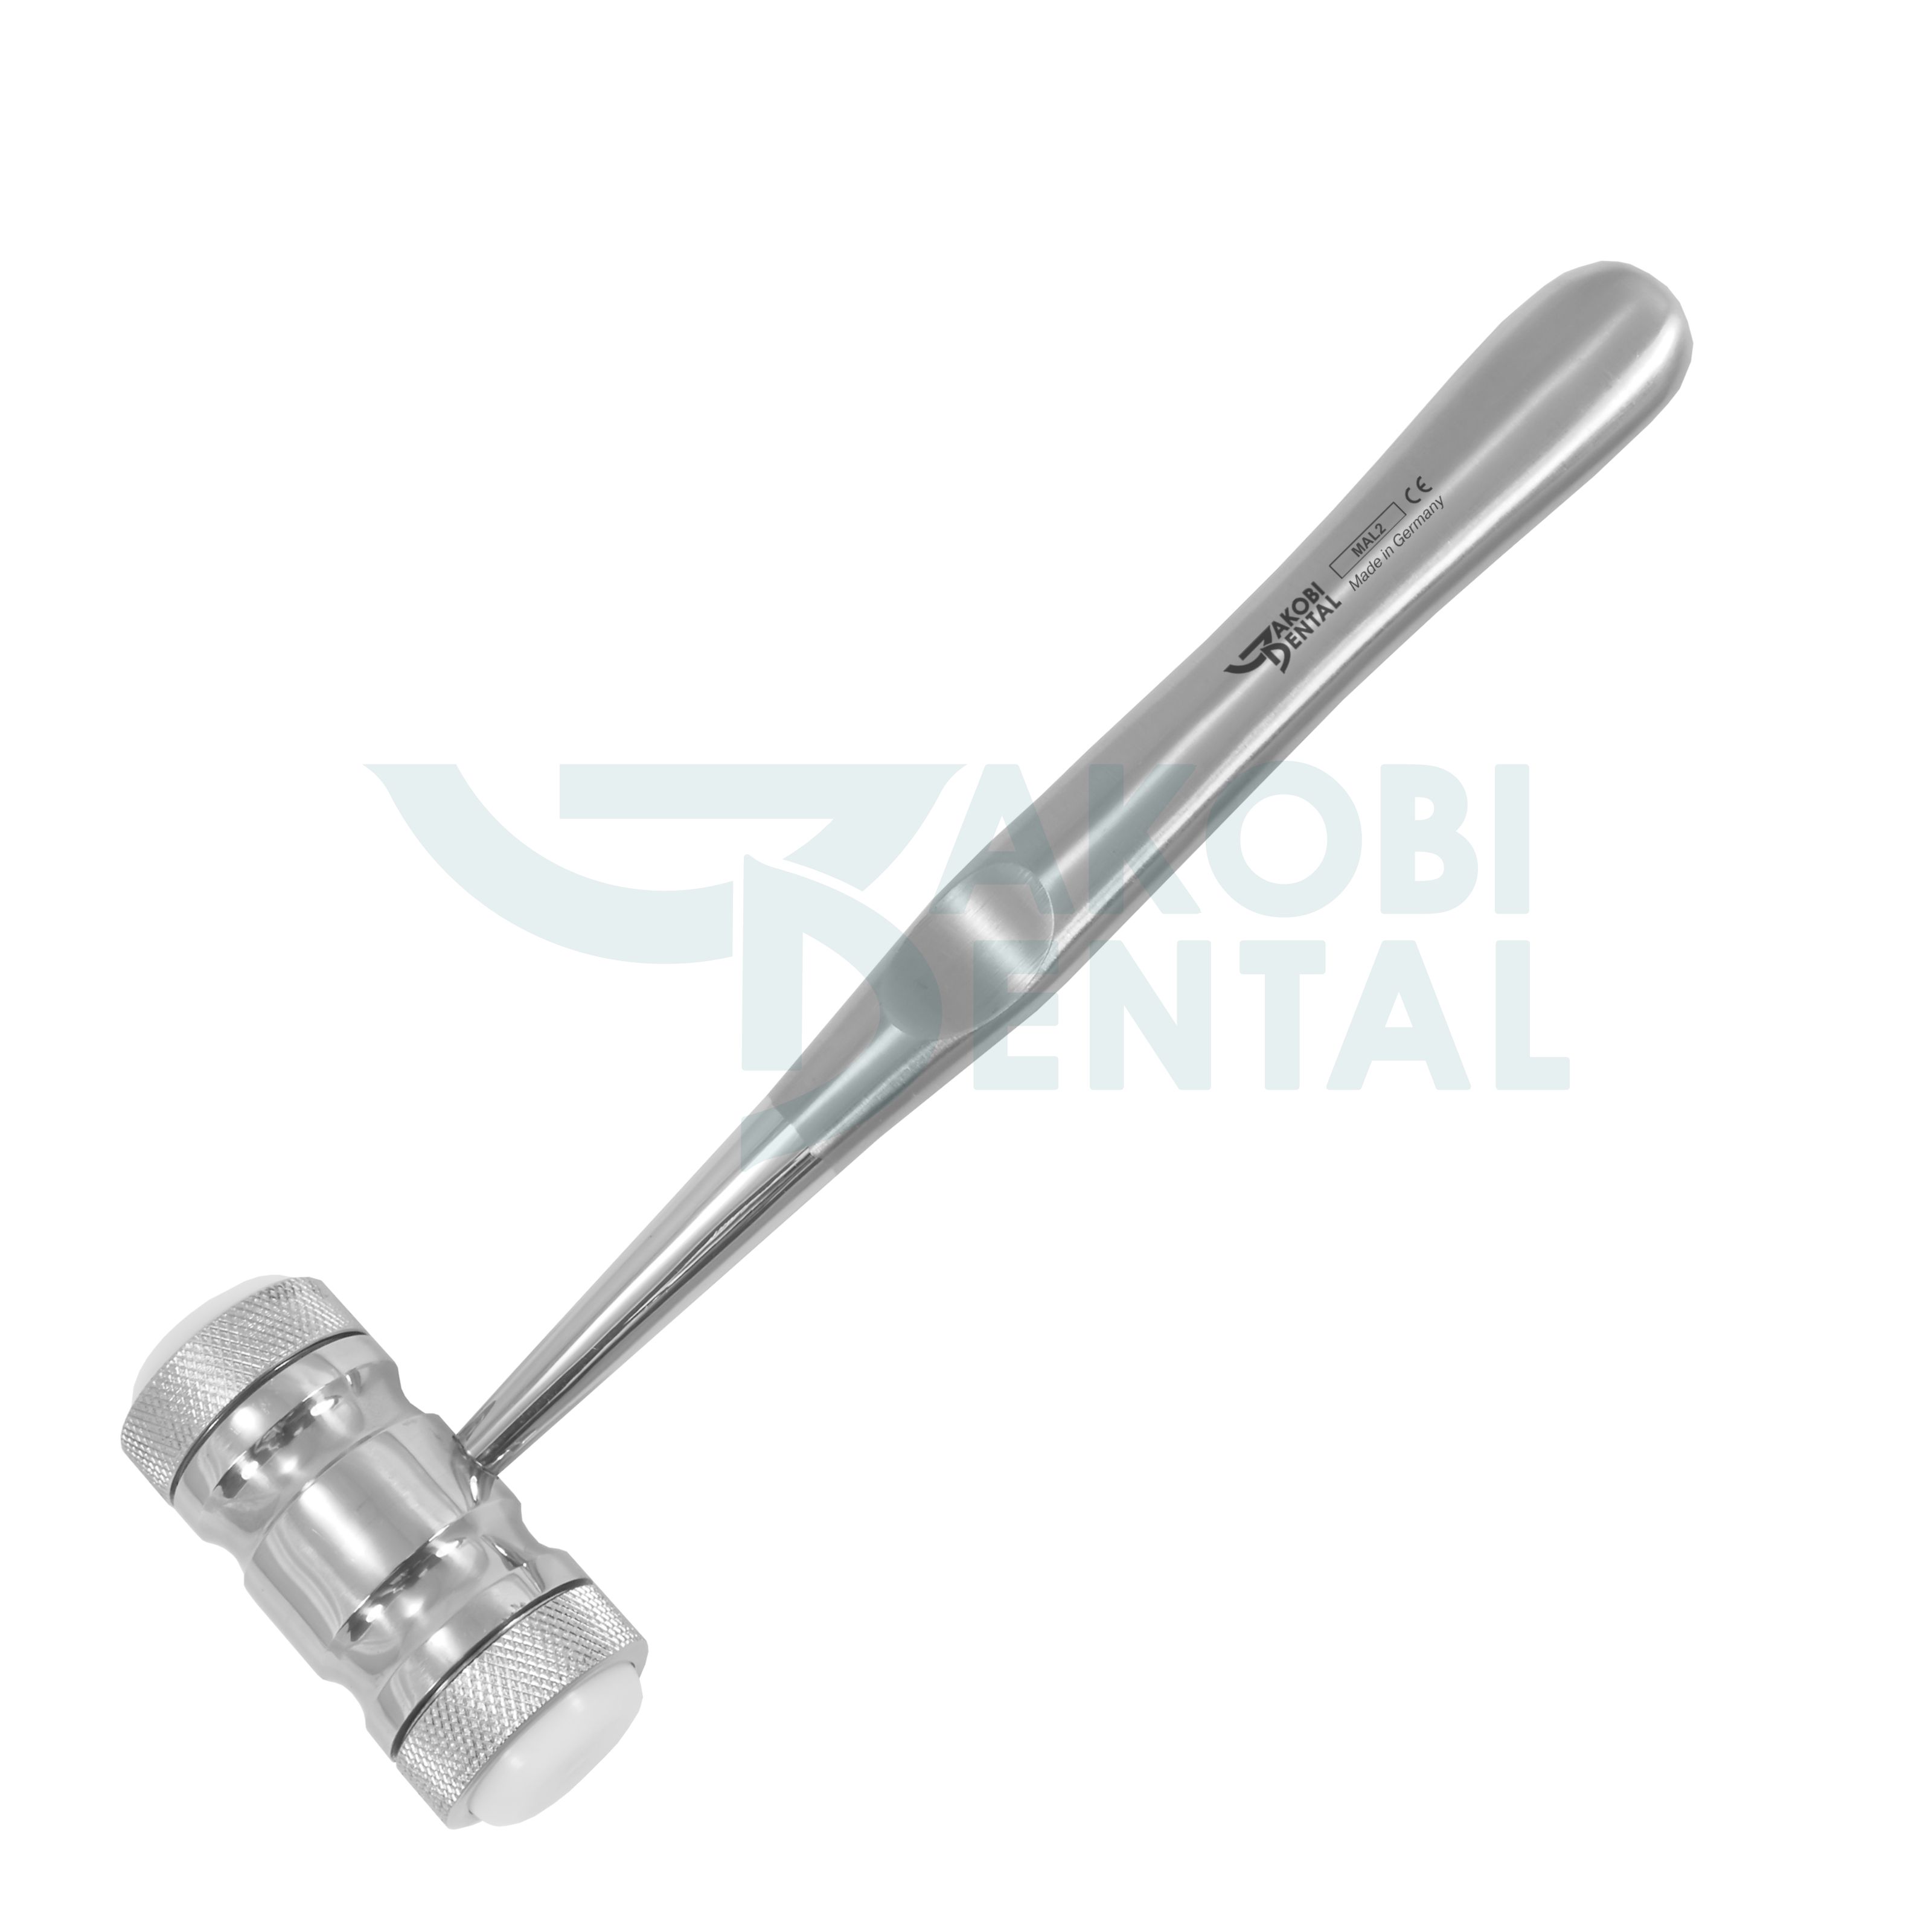 Surgical mallet Mead, 300 Gram, changeable nylon jaws